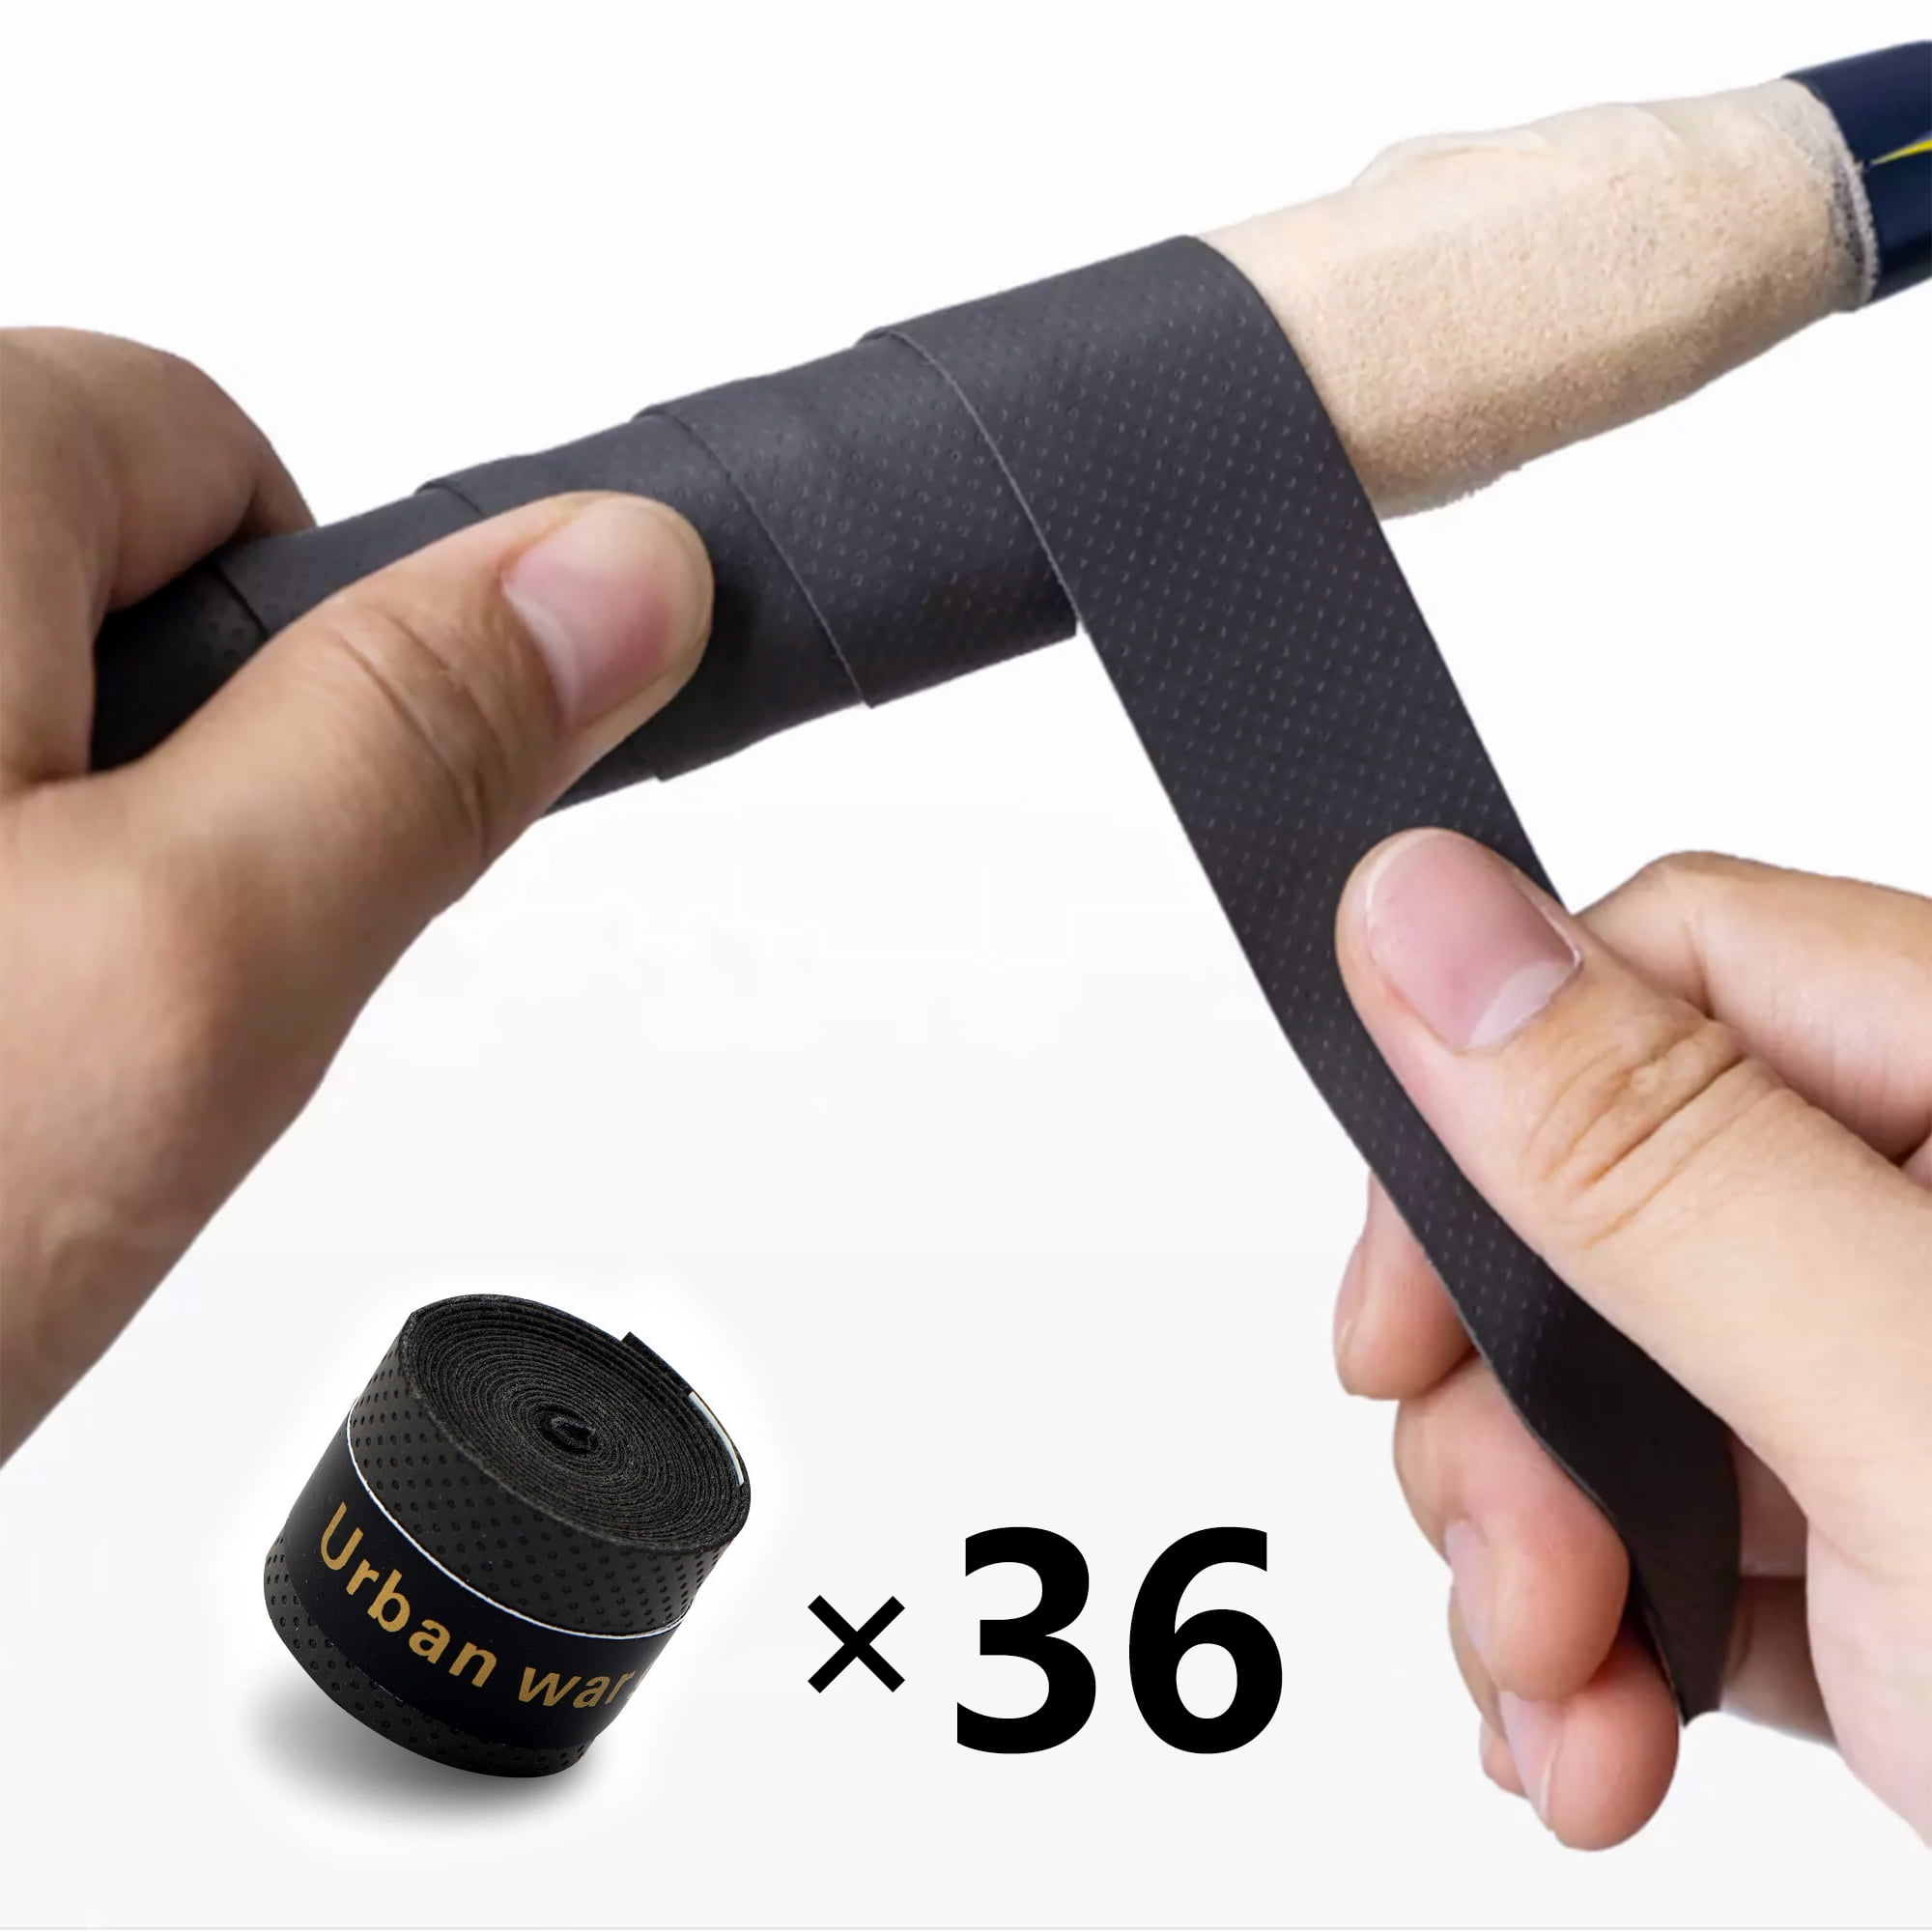 SNIPER SKIN Fishing Rod Grip, Better Alternative to Grip Tape, Easy to  Install Grip for Fishing Gear Handle, Fishing Accessories